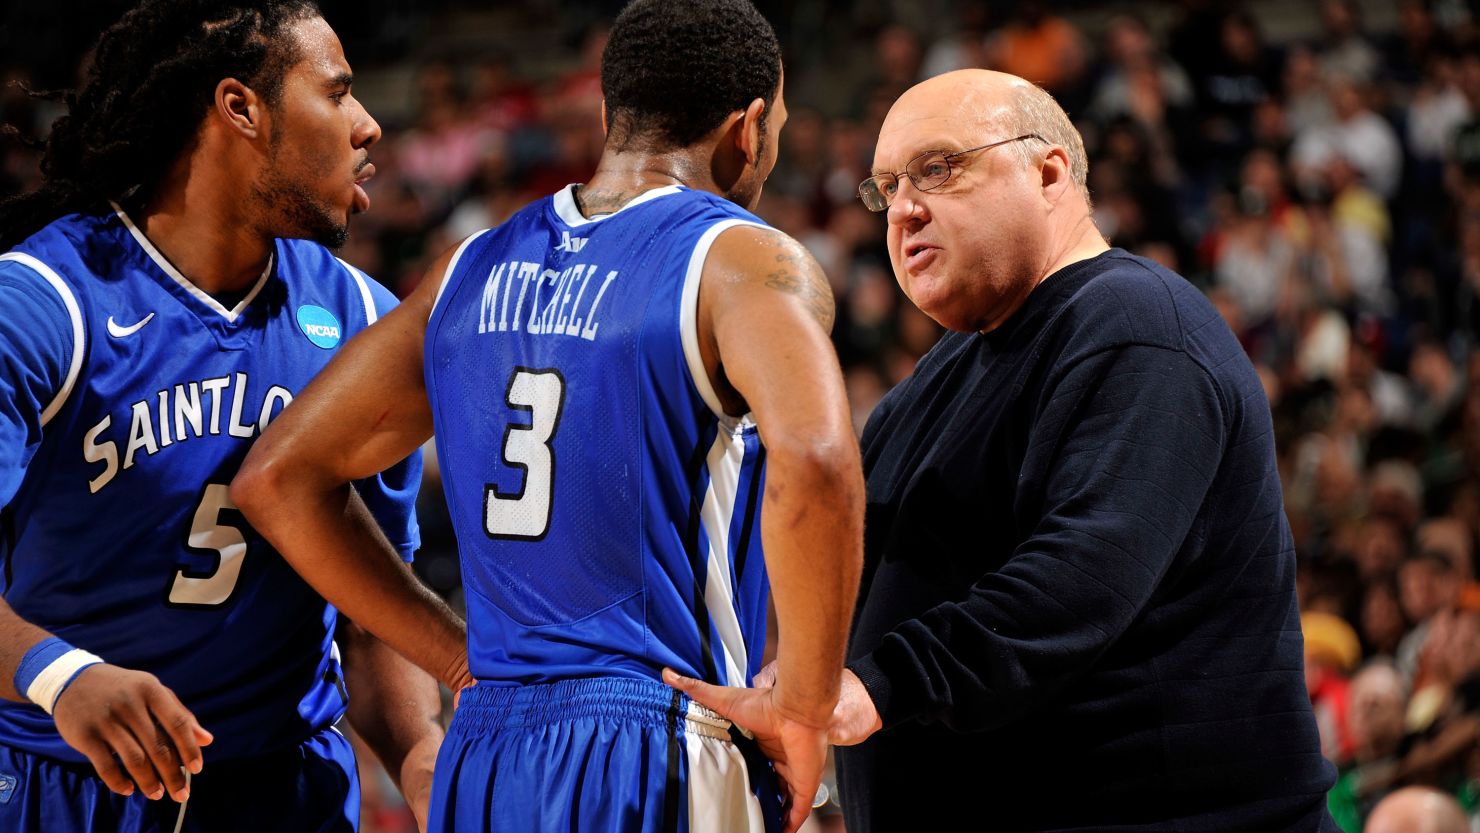 In 25 years, Rick Majerus coached at four schools, taking 12 teams to the NCAA tournament. 